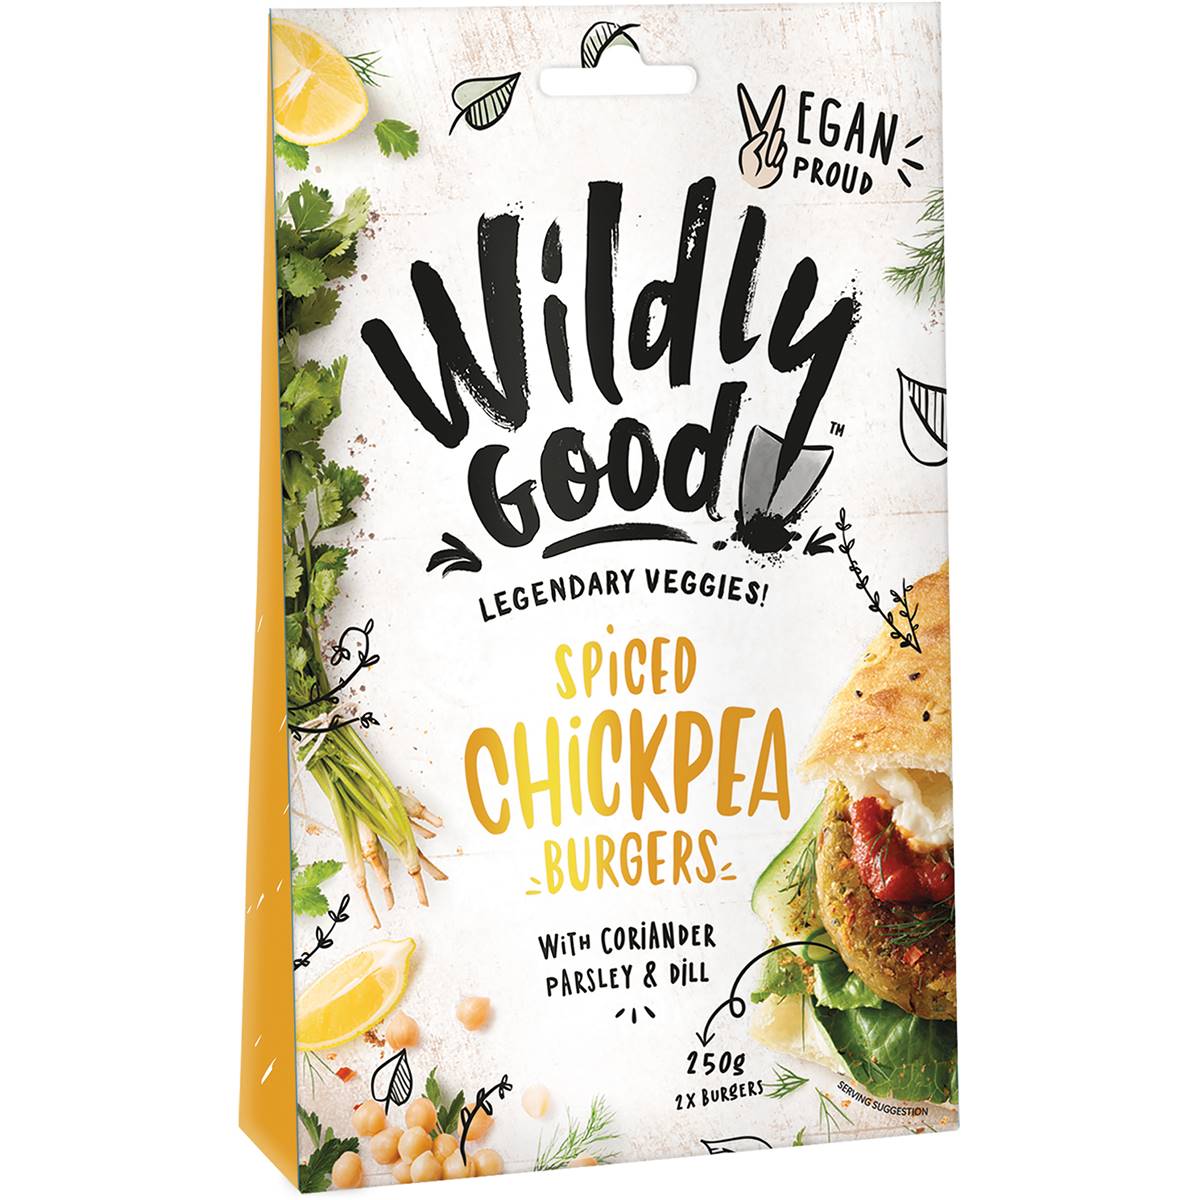 Calories in Wildly Good Spiced Chickpea Burgers